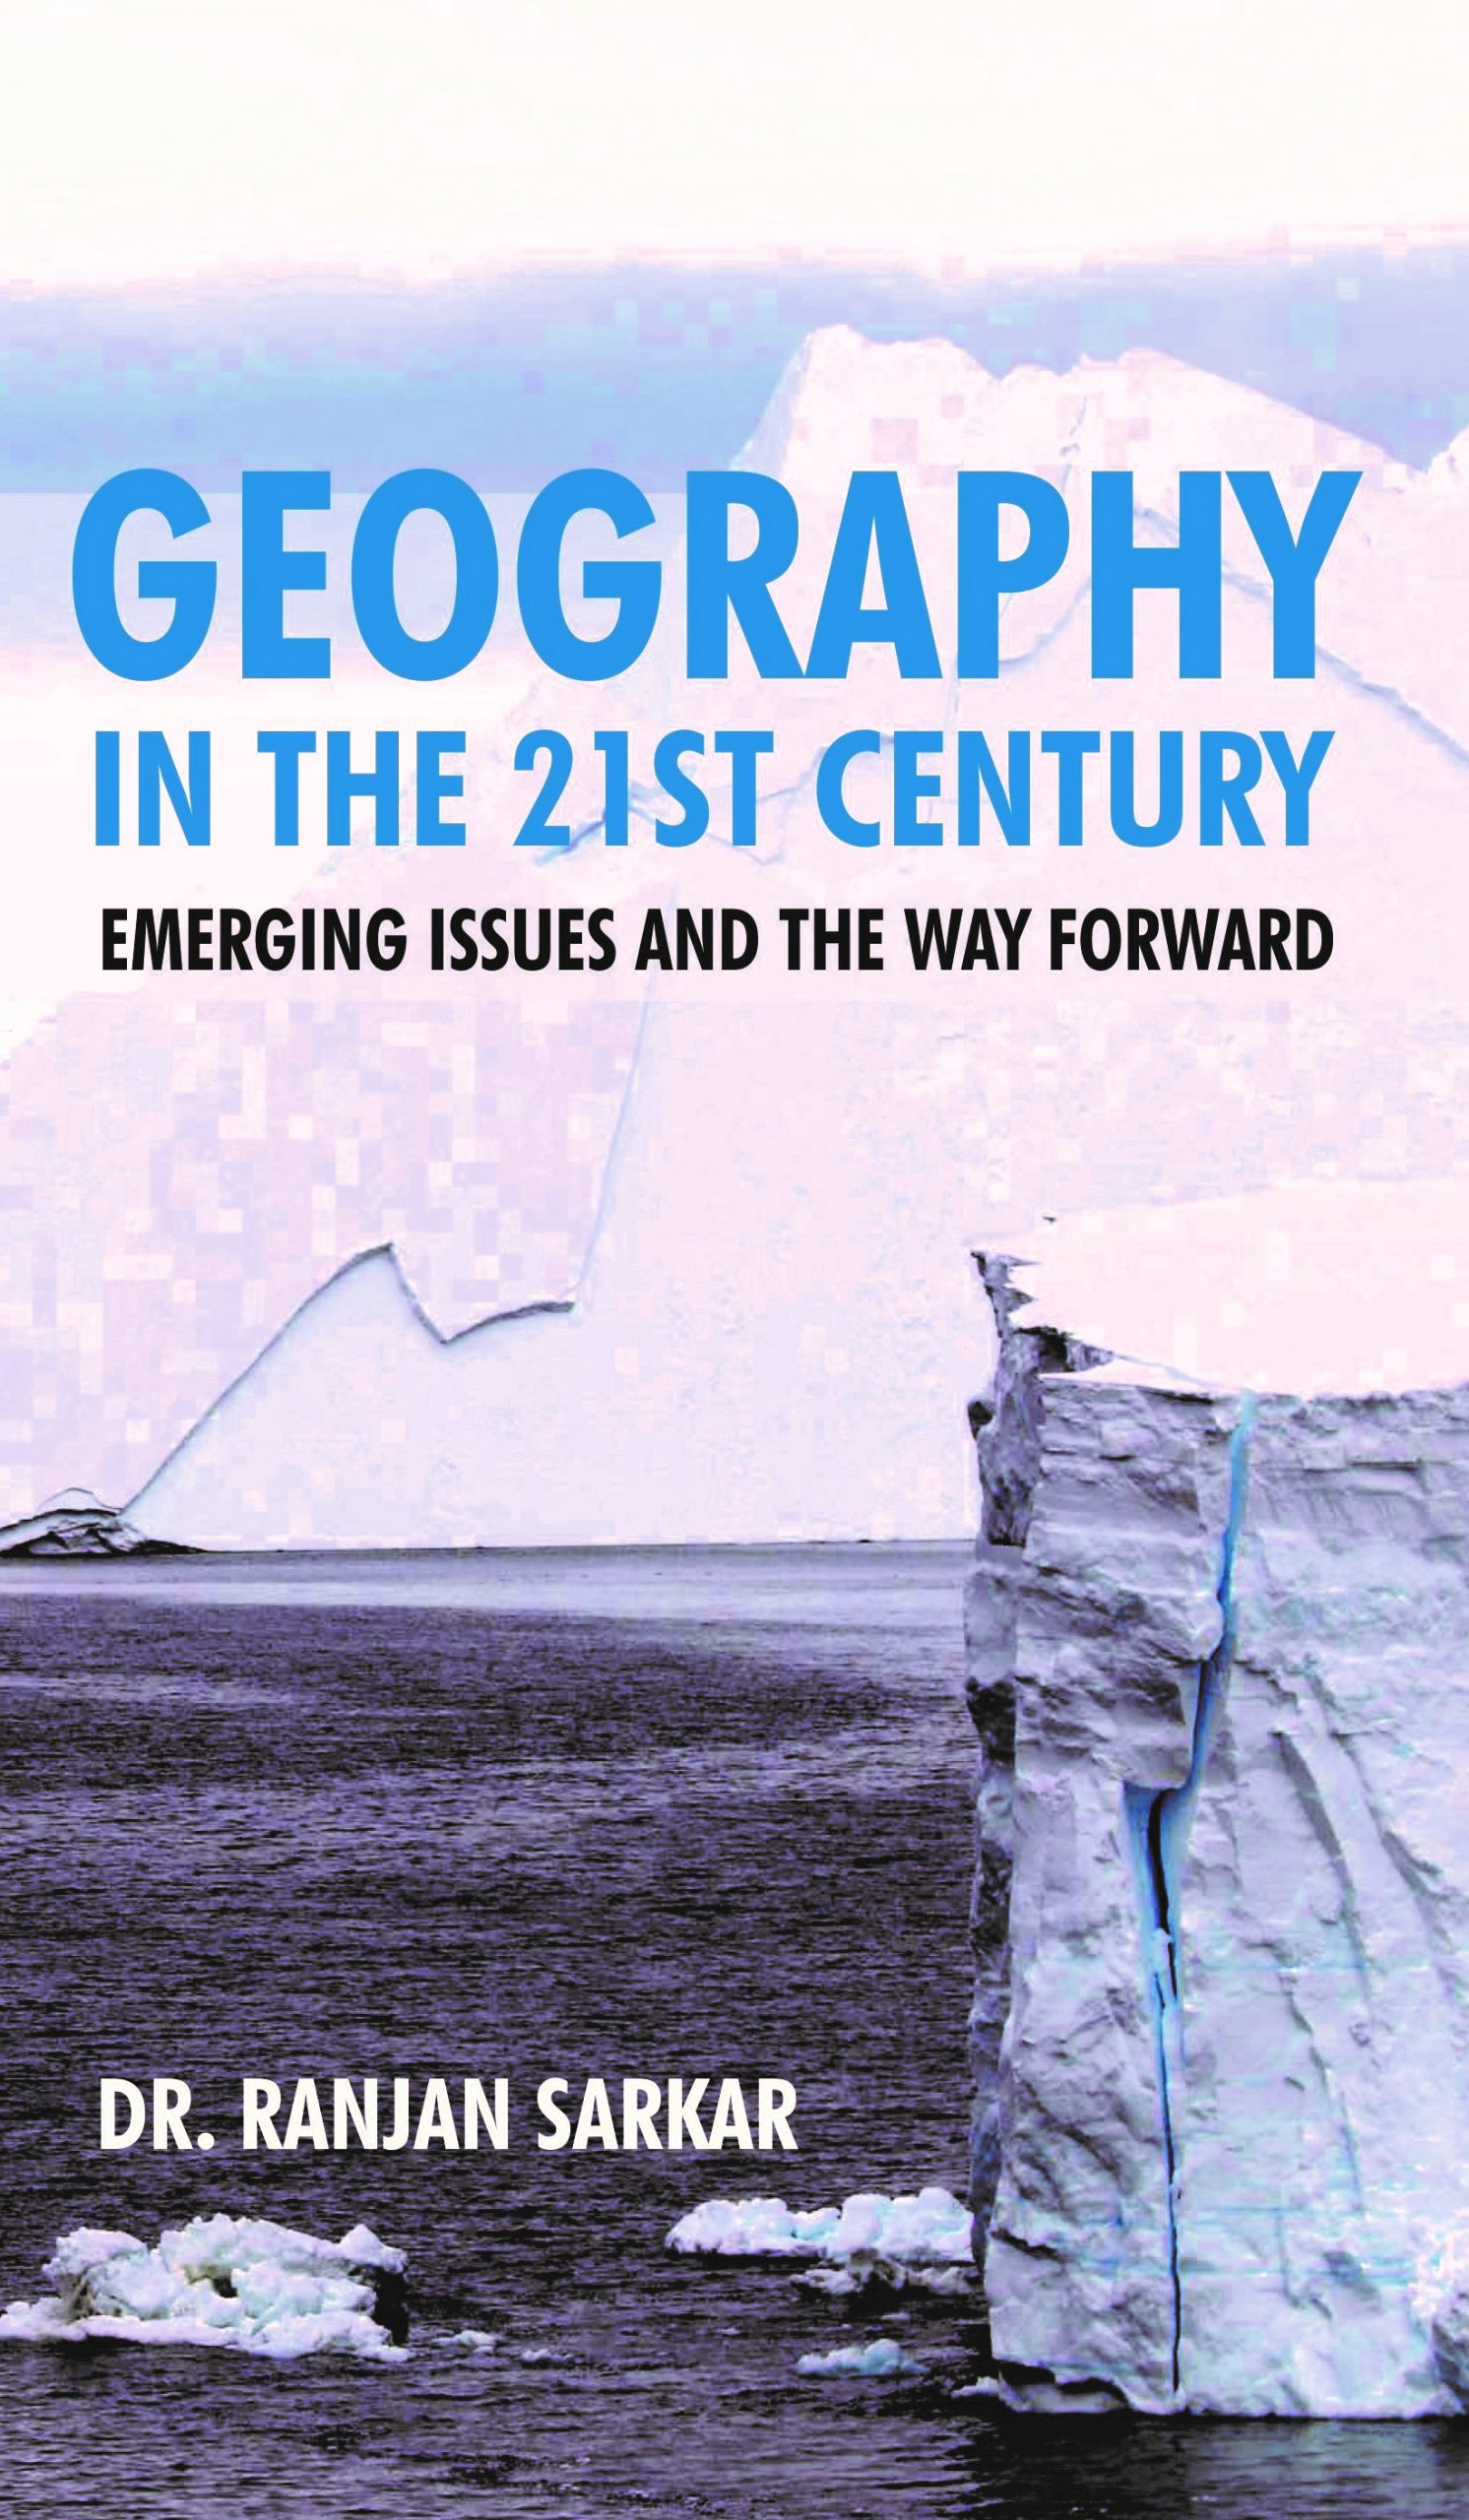 GEOGRAPHY IN THE 21ST CENTURY: EMERGING ISSUES AND THE WAY FORWARD